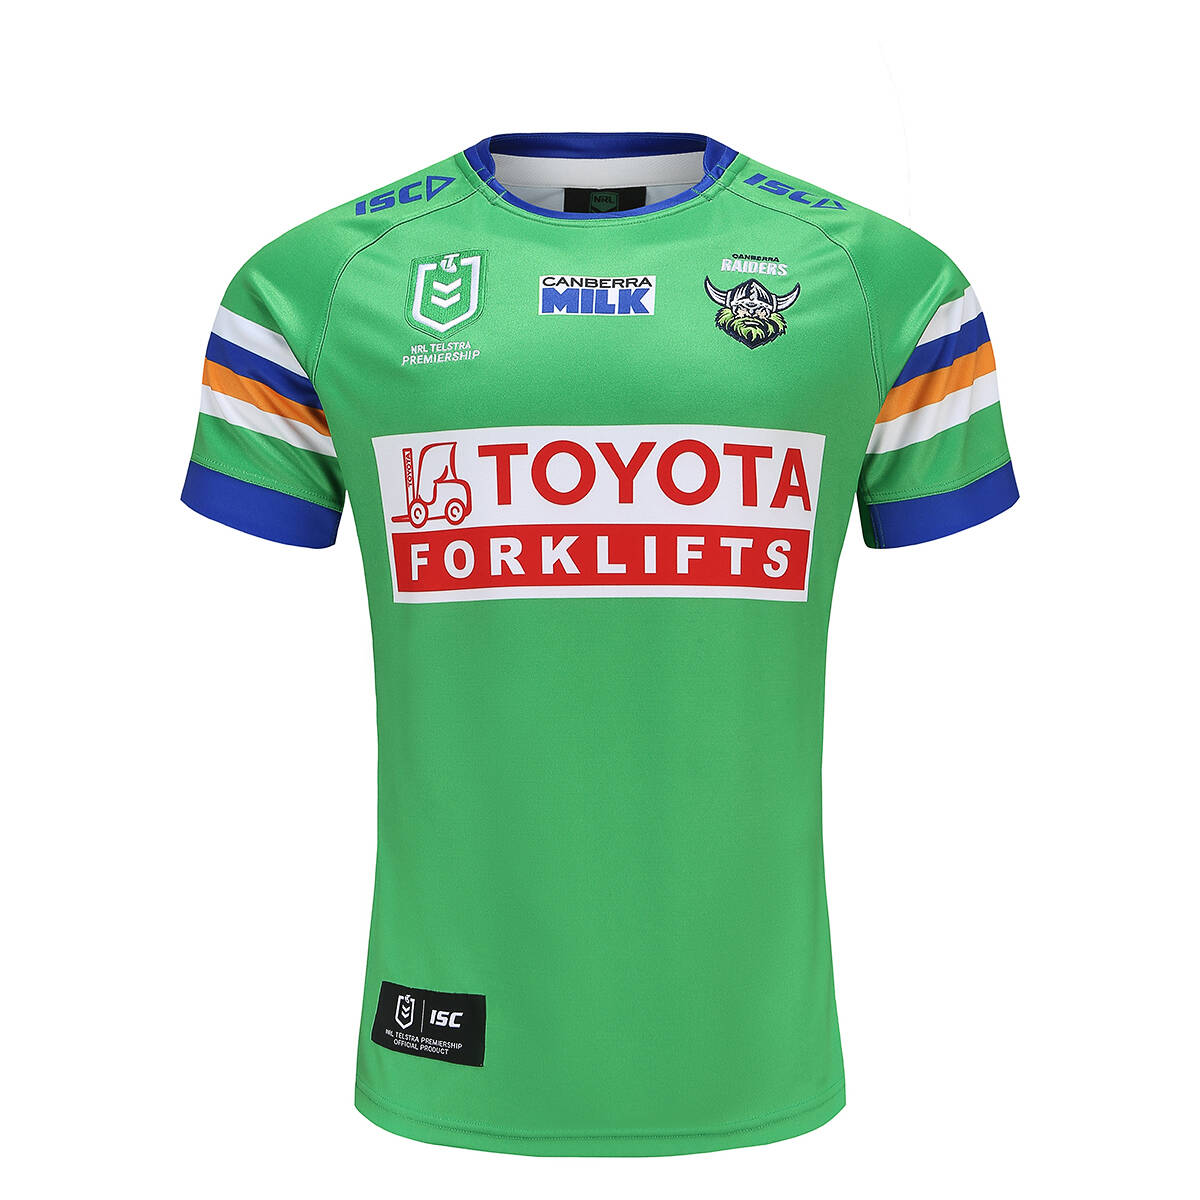 NRL CANBERRA RAIDERS JERSEY